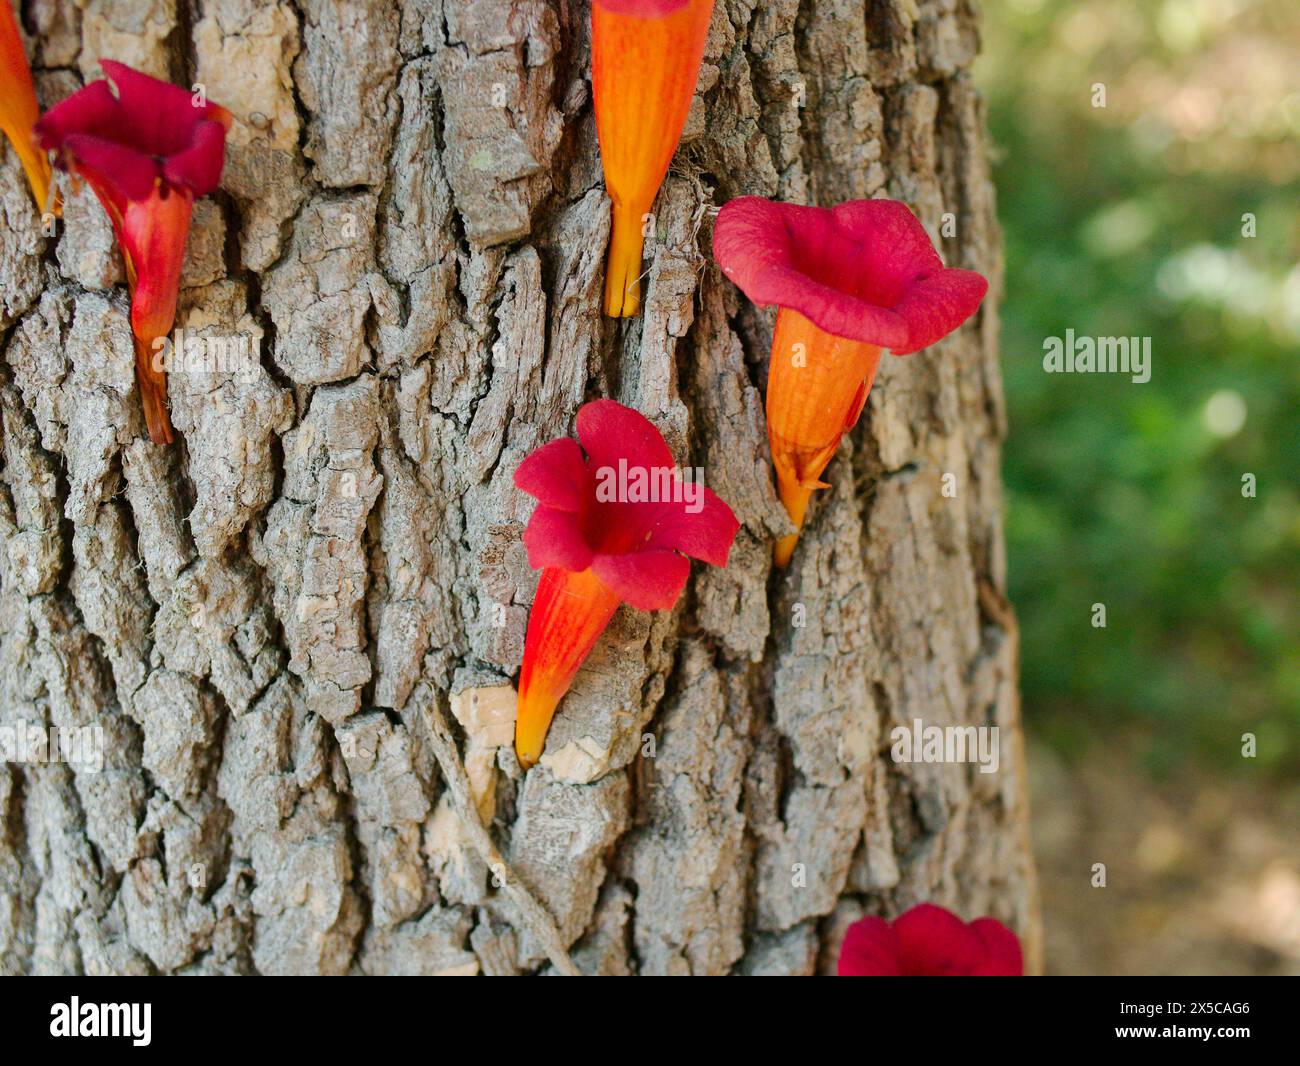 Close view on the side of a tree bark in sunlight Trumpet vines (Campsis radicans)  creeper clusters of showy red and orange trumpet shaped blooms. Stock Photo